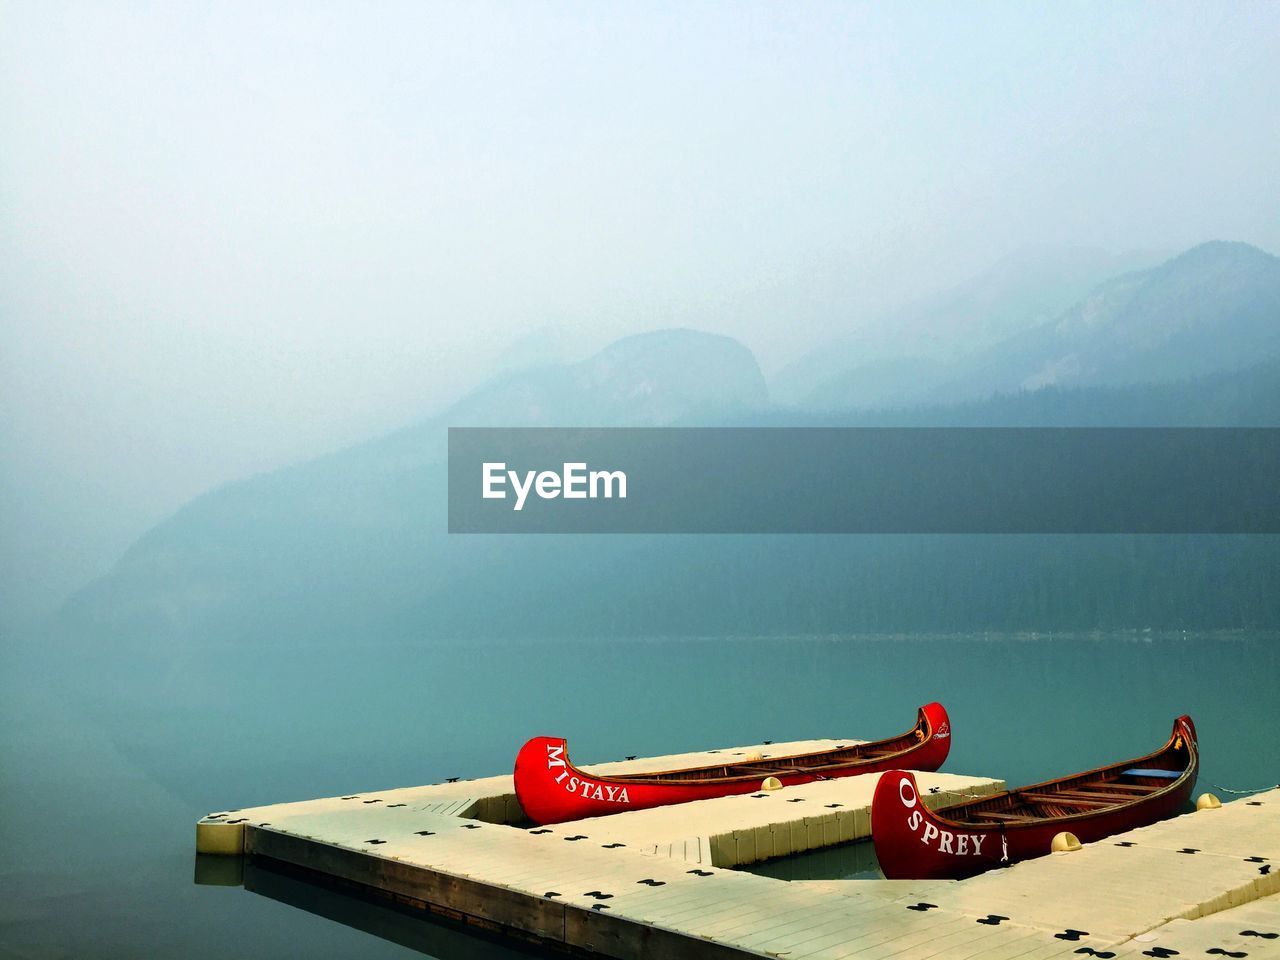 Red boats moored at pier on lake louise during foggy weather